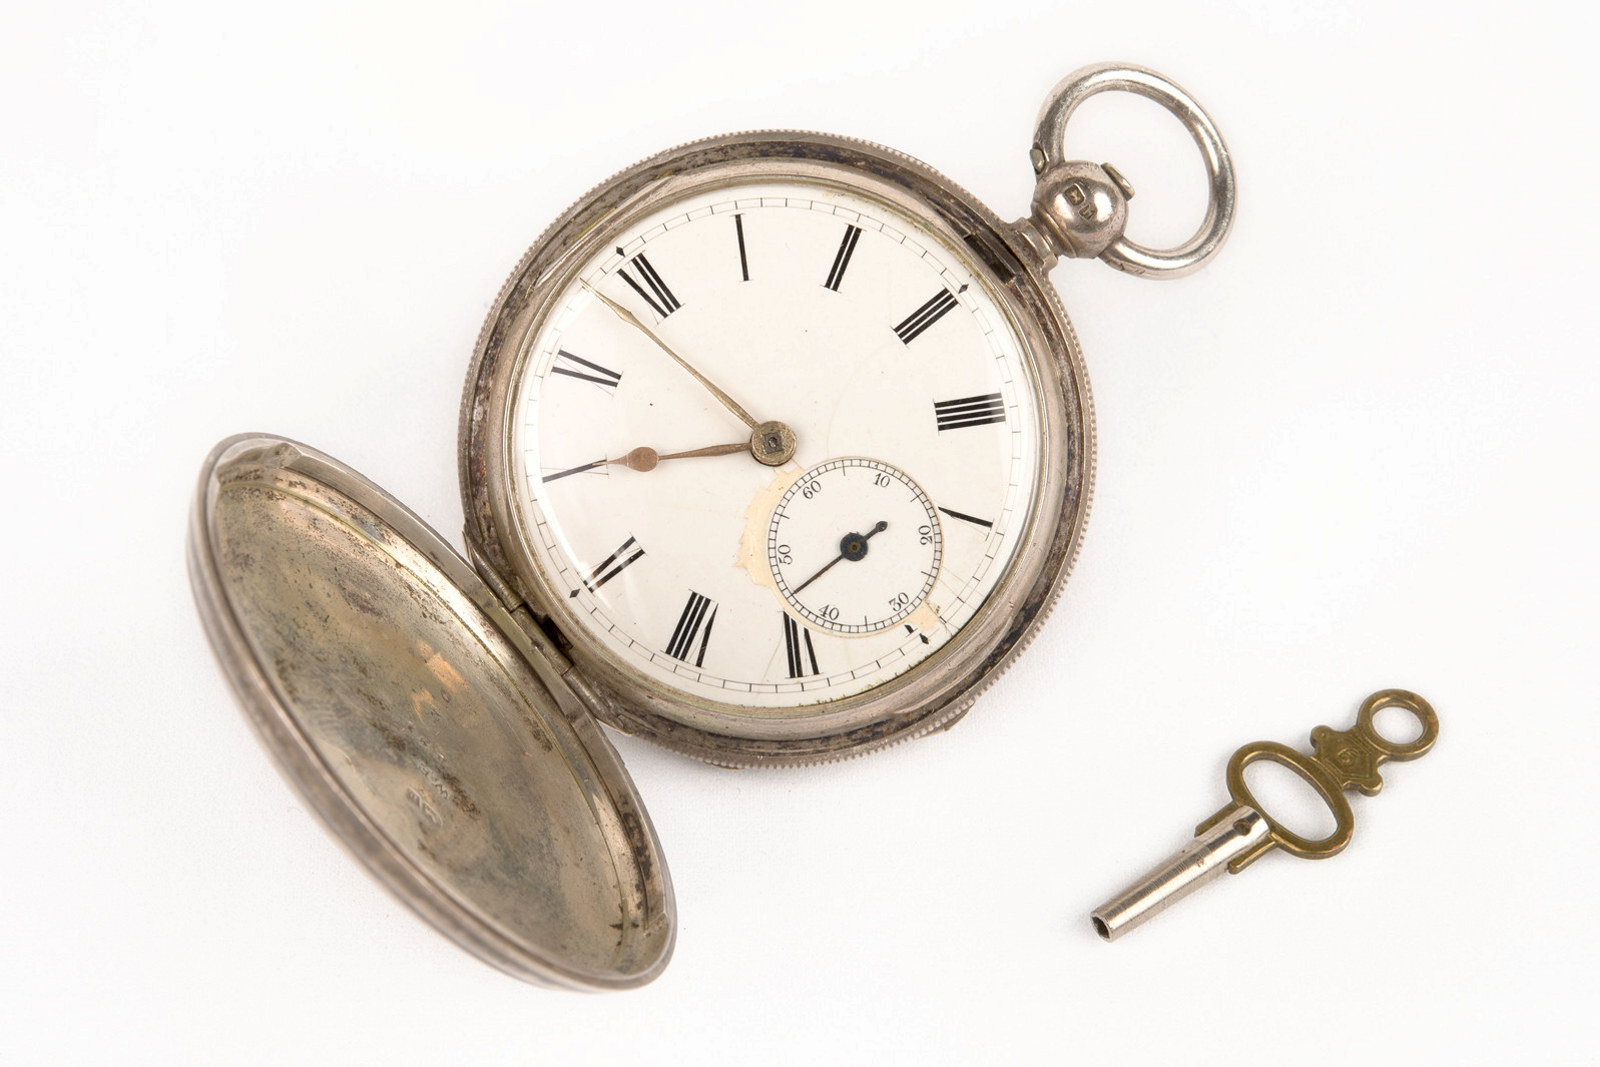 Pocket watch and winding key, circa 1863, belonging to Hugo Youngein who operated shop at Susannah Place